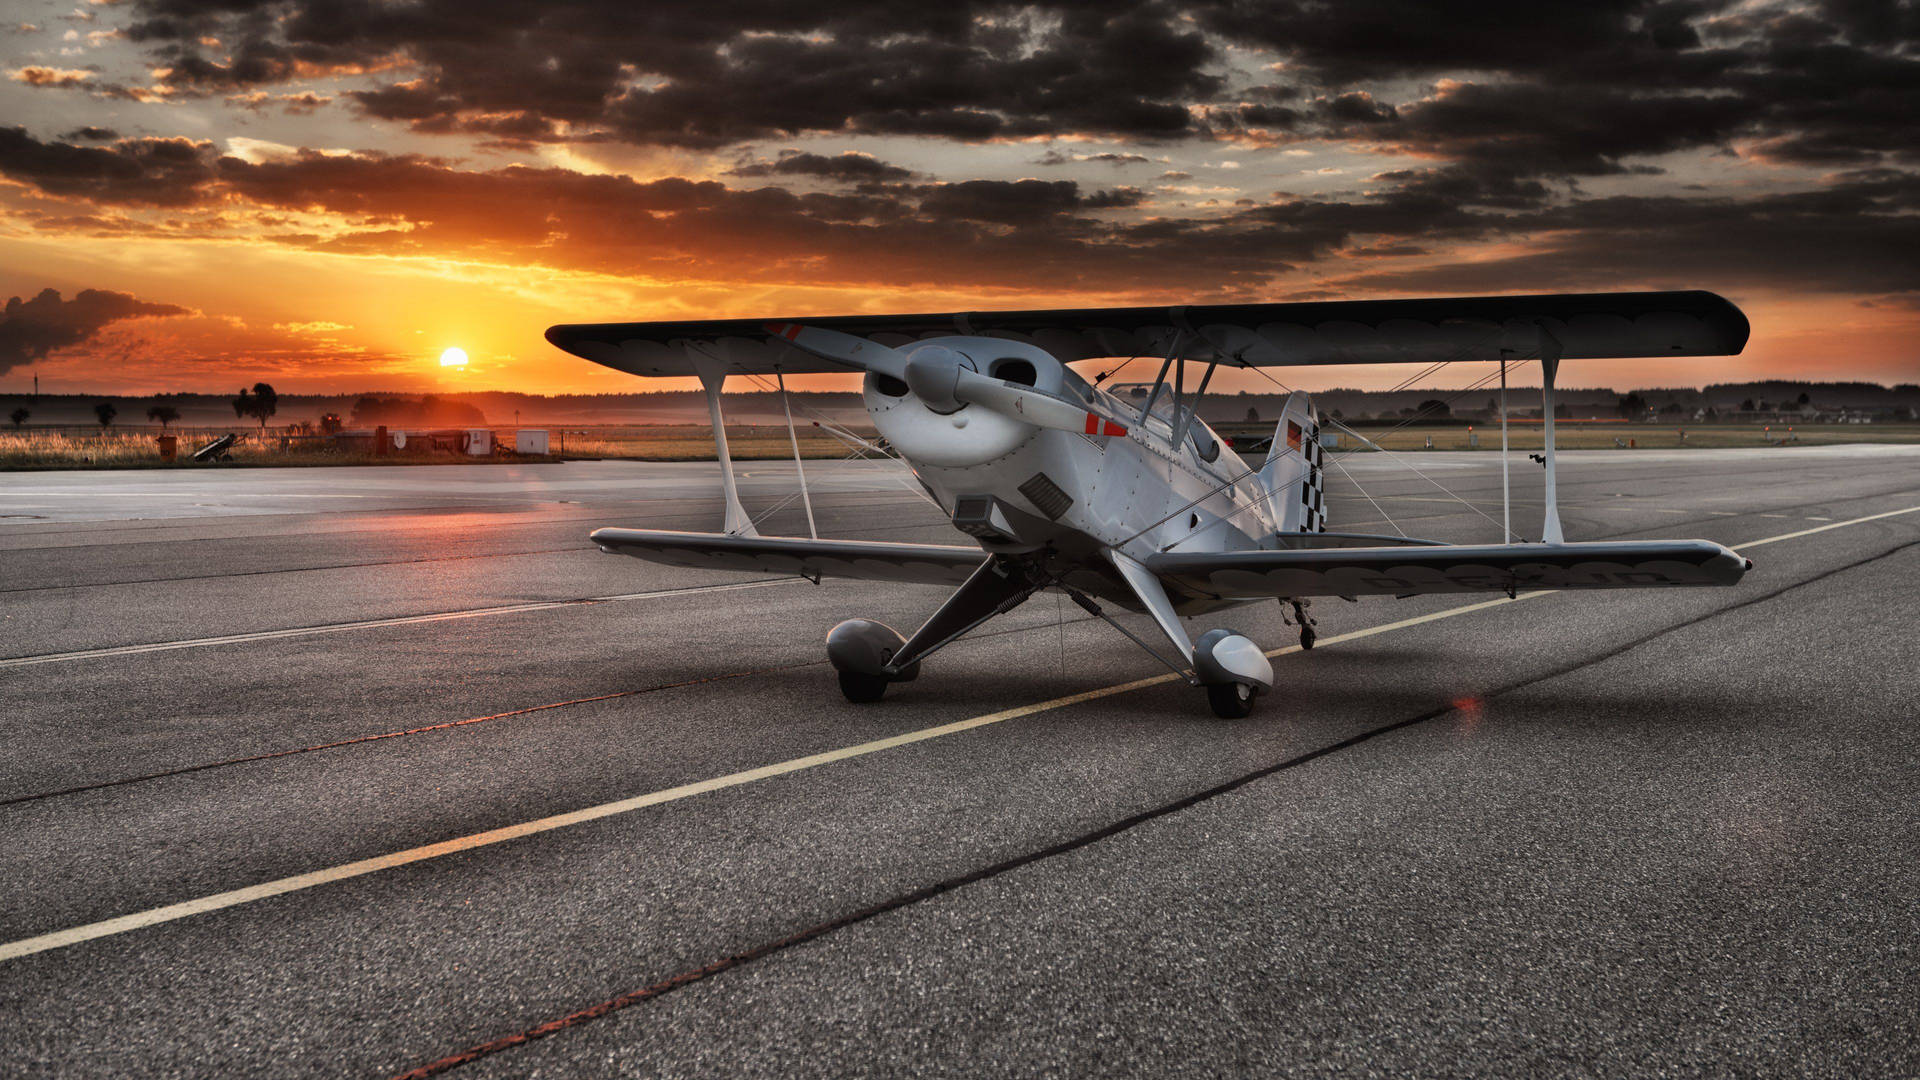 Small Airport Plane Sunset Background